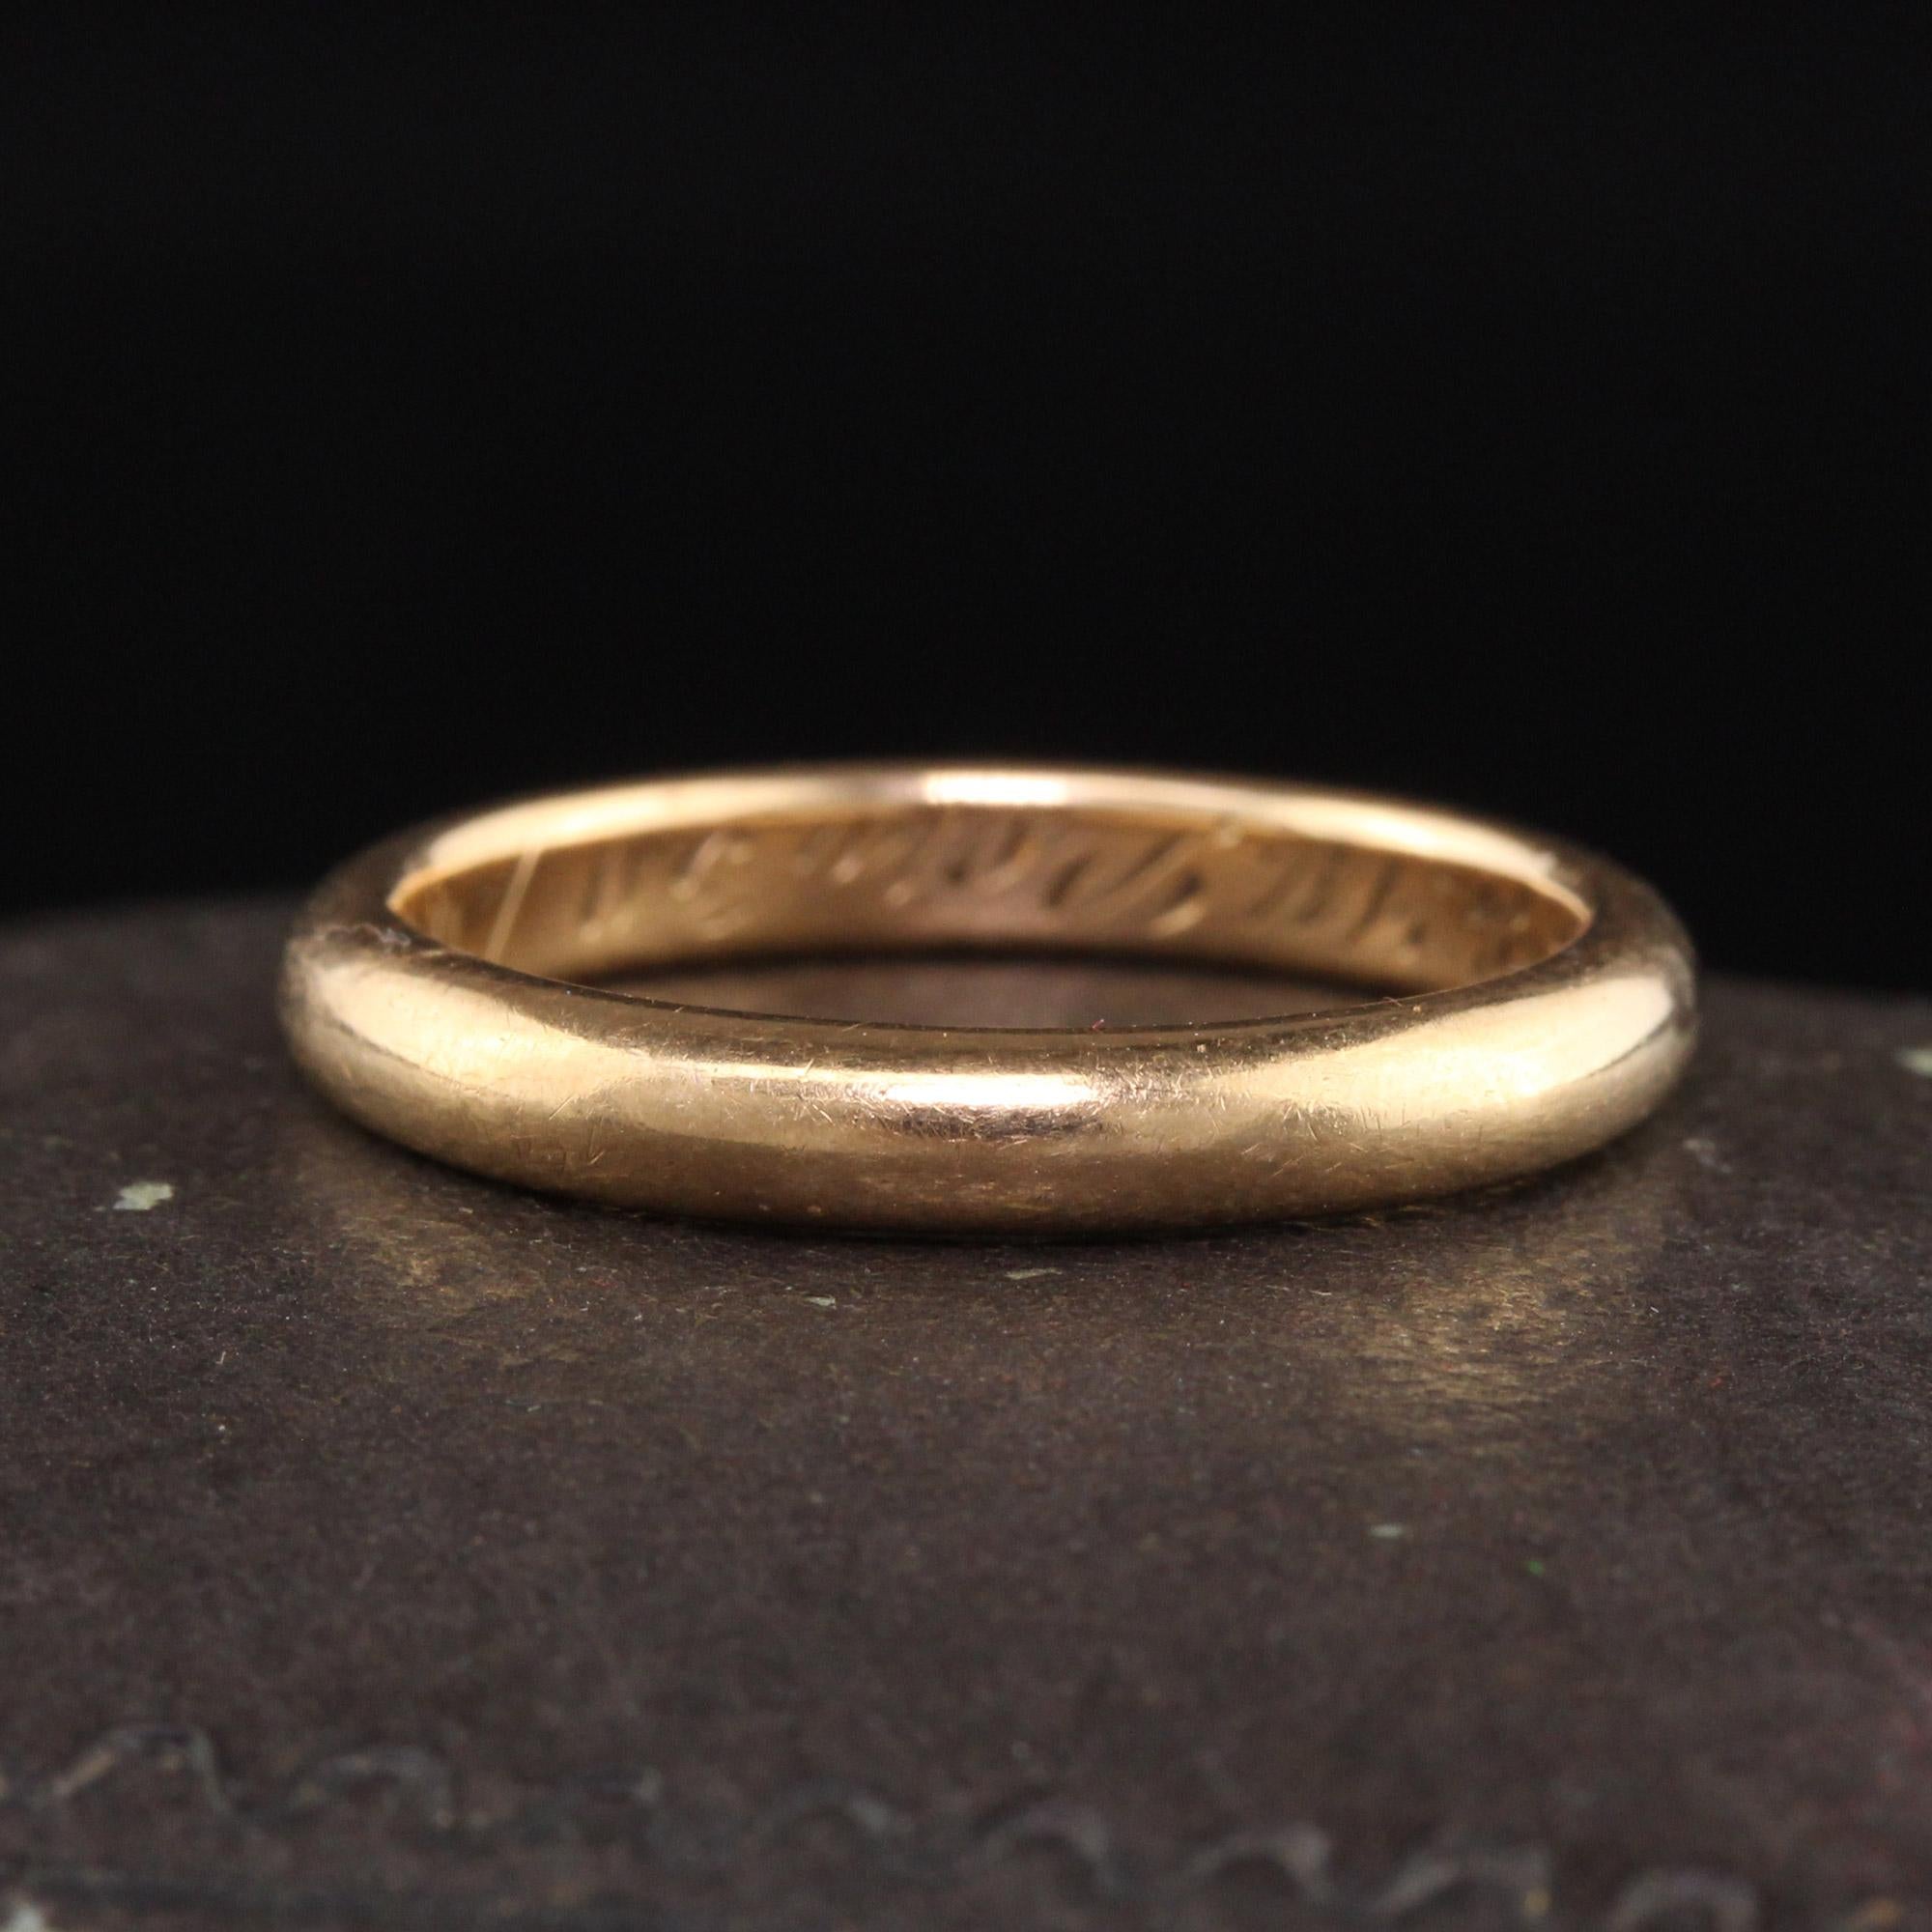 Beautiful Antique Art Deco 14K Yellow Gold Classic Wedding Band - Size 6. This classic wedding band is crafted in yellow gold and has engravings inside the ring which read 